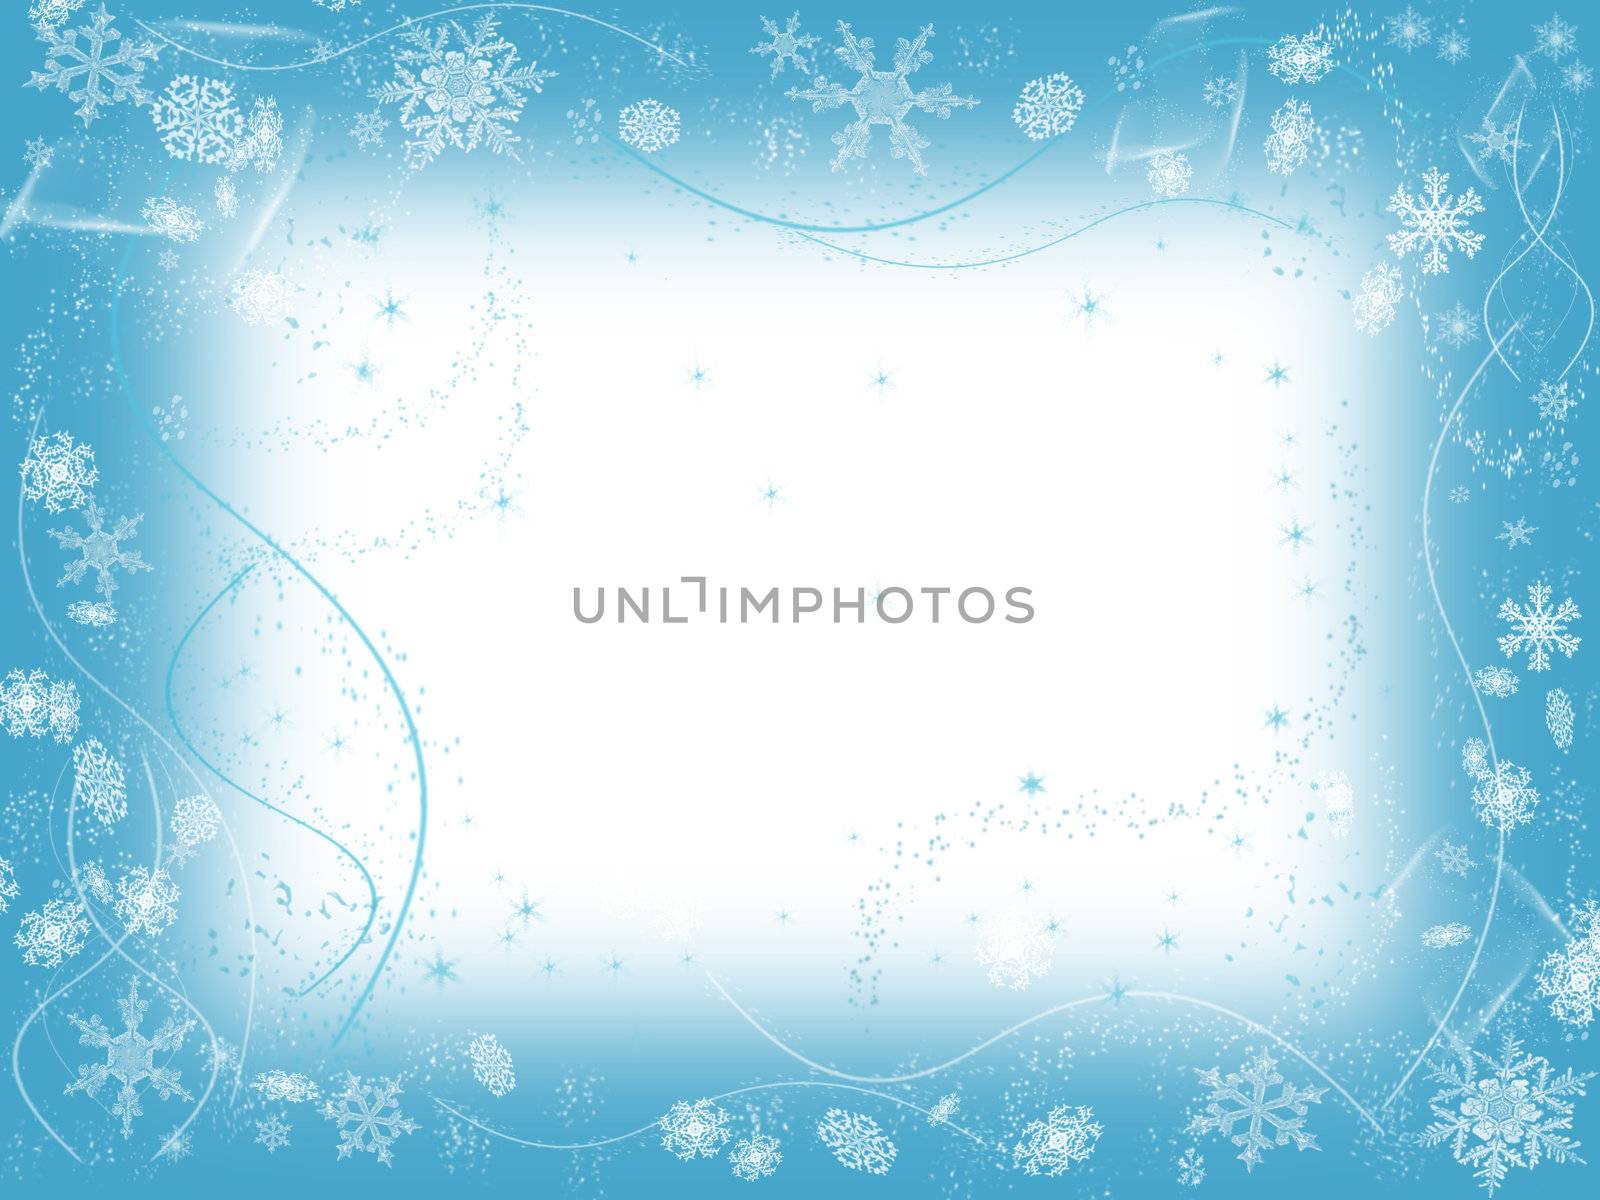 white snowflakes over light blue background with feather center
